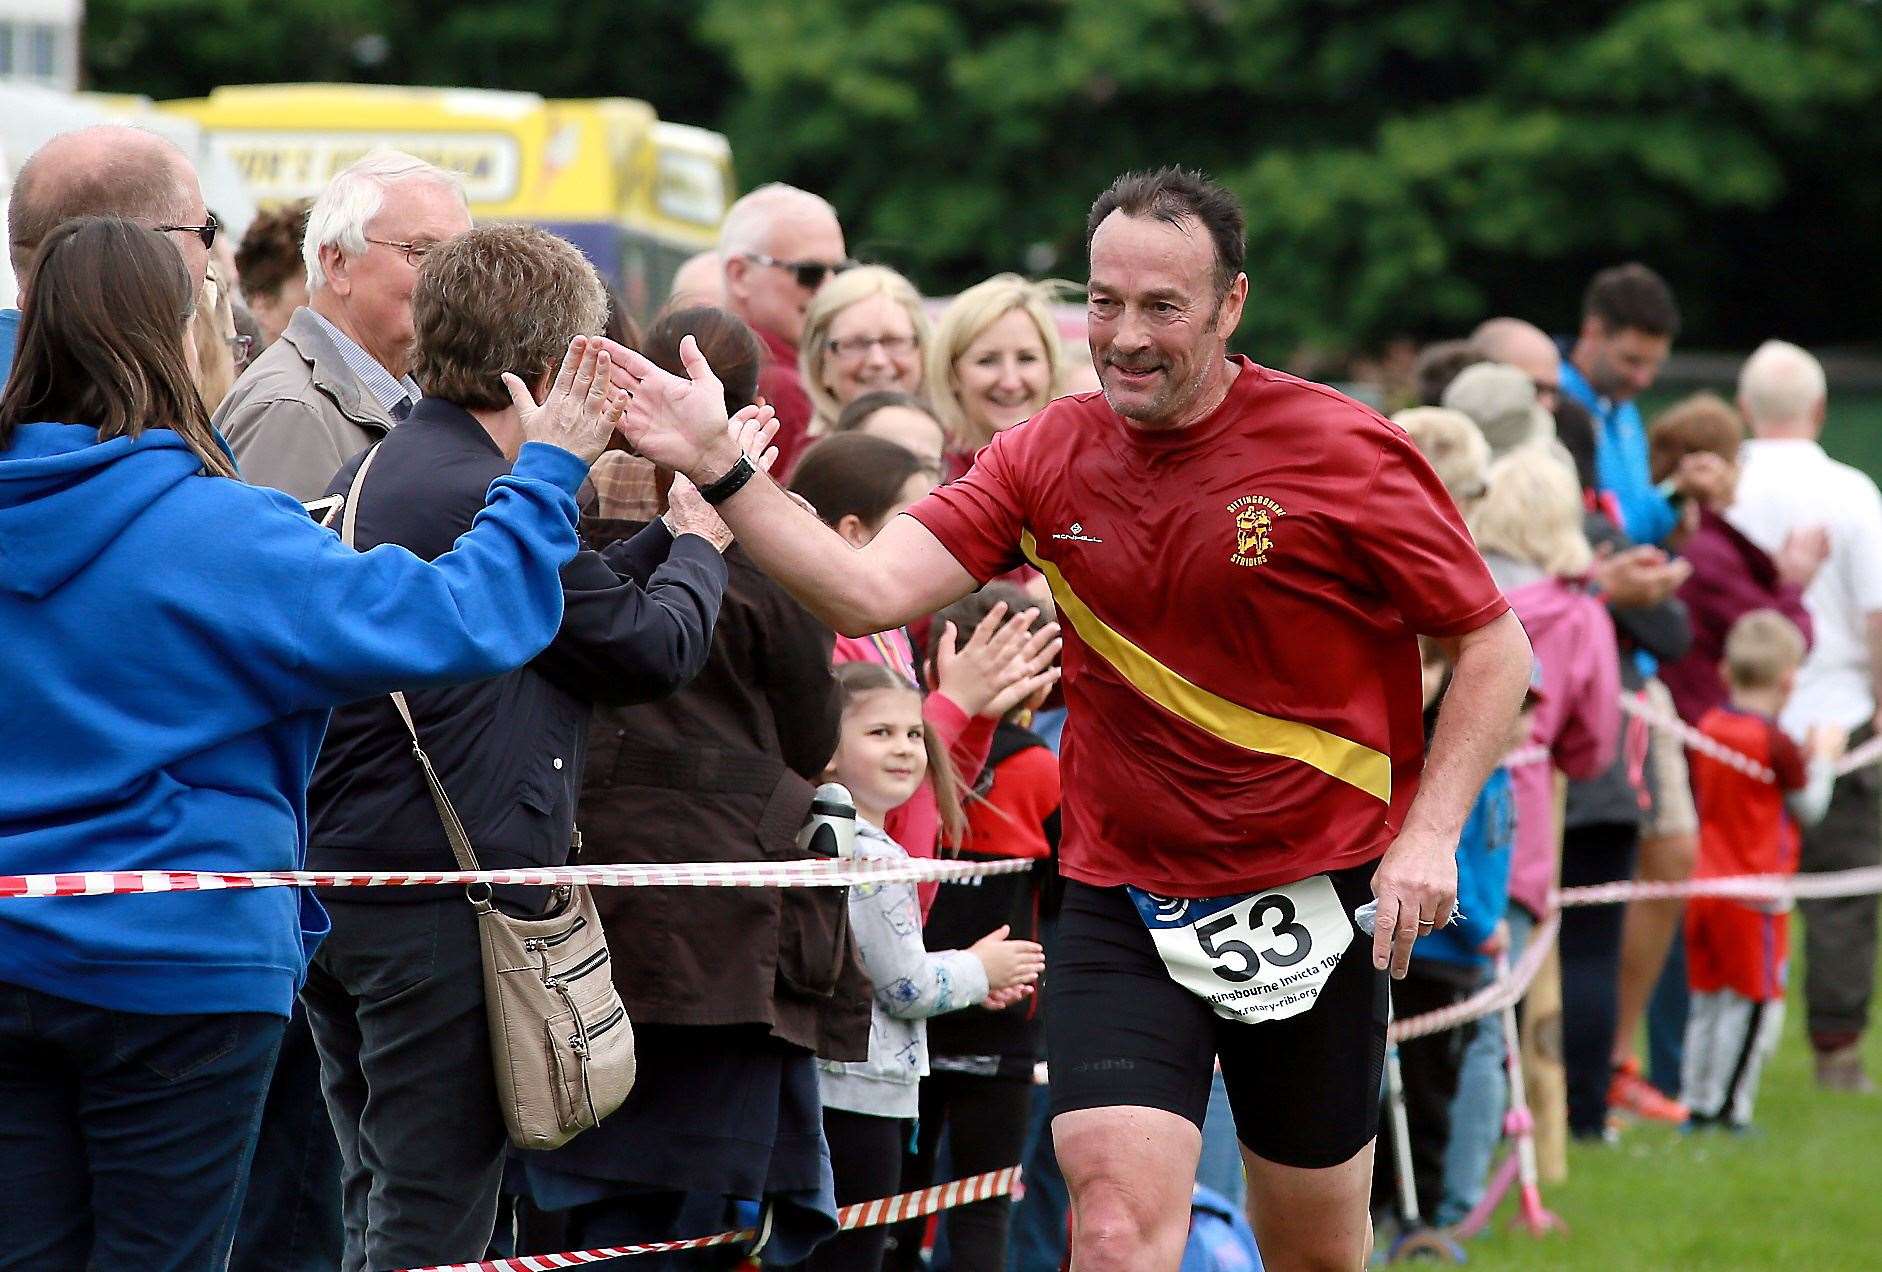 Runners come from across the country to compete in the Sittingbourne Invicta race